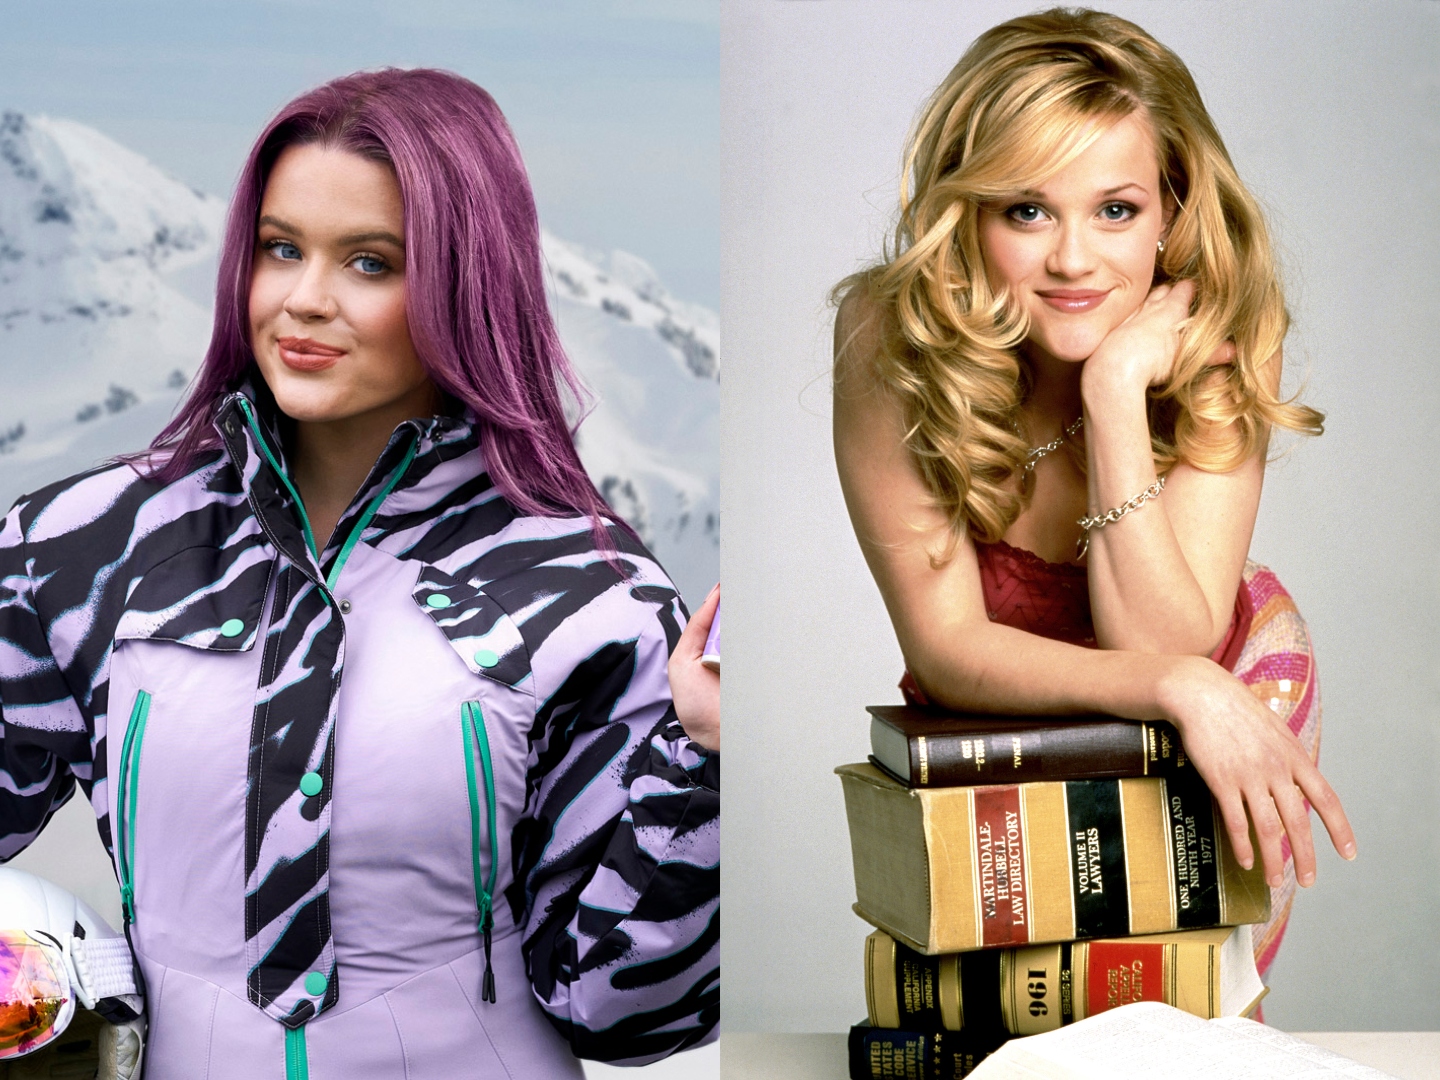 Ava Phillippe Is Mom Reese Witherspoon’s Legally Blonde Era Twin in Her New Modeling Photos